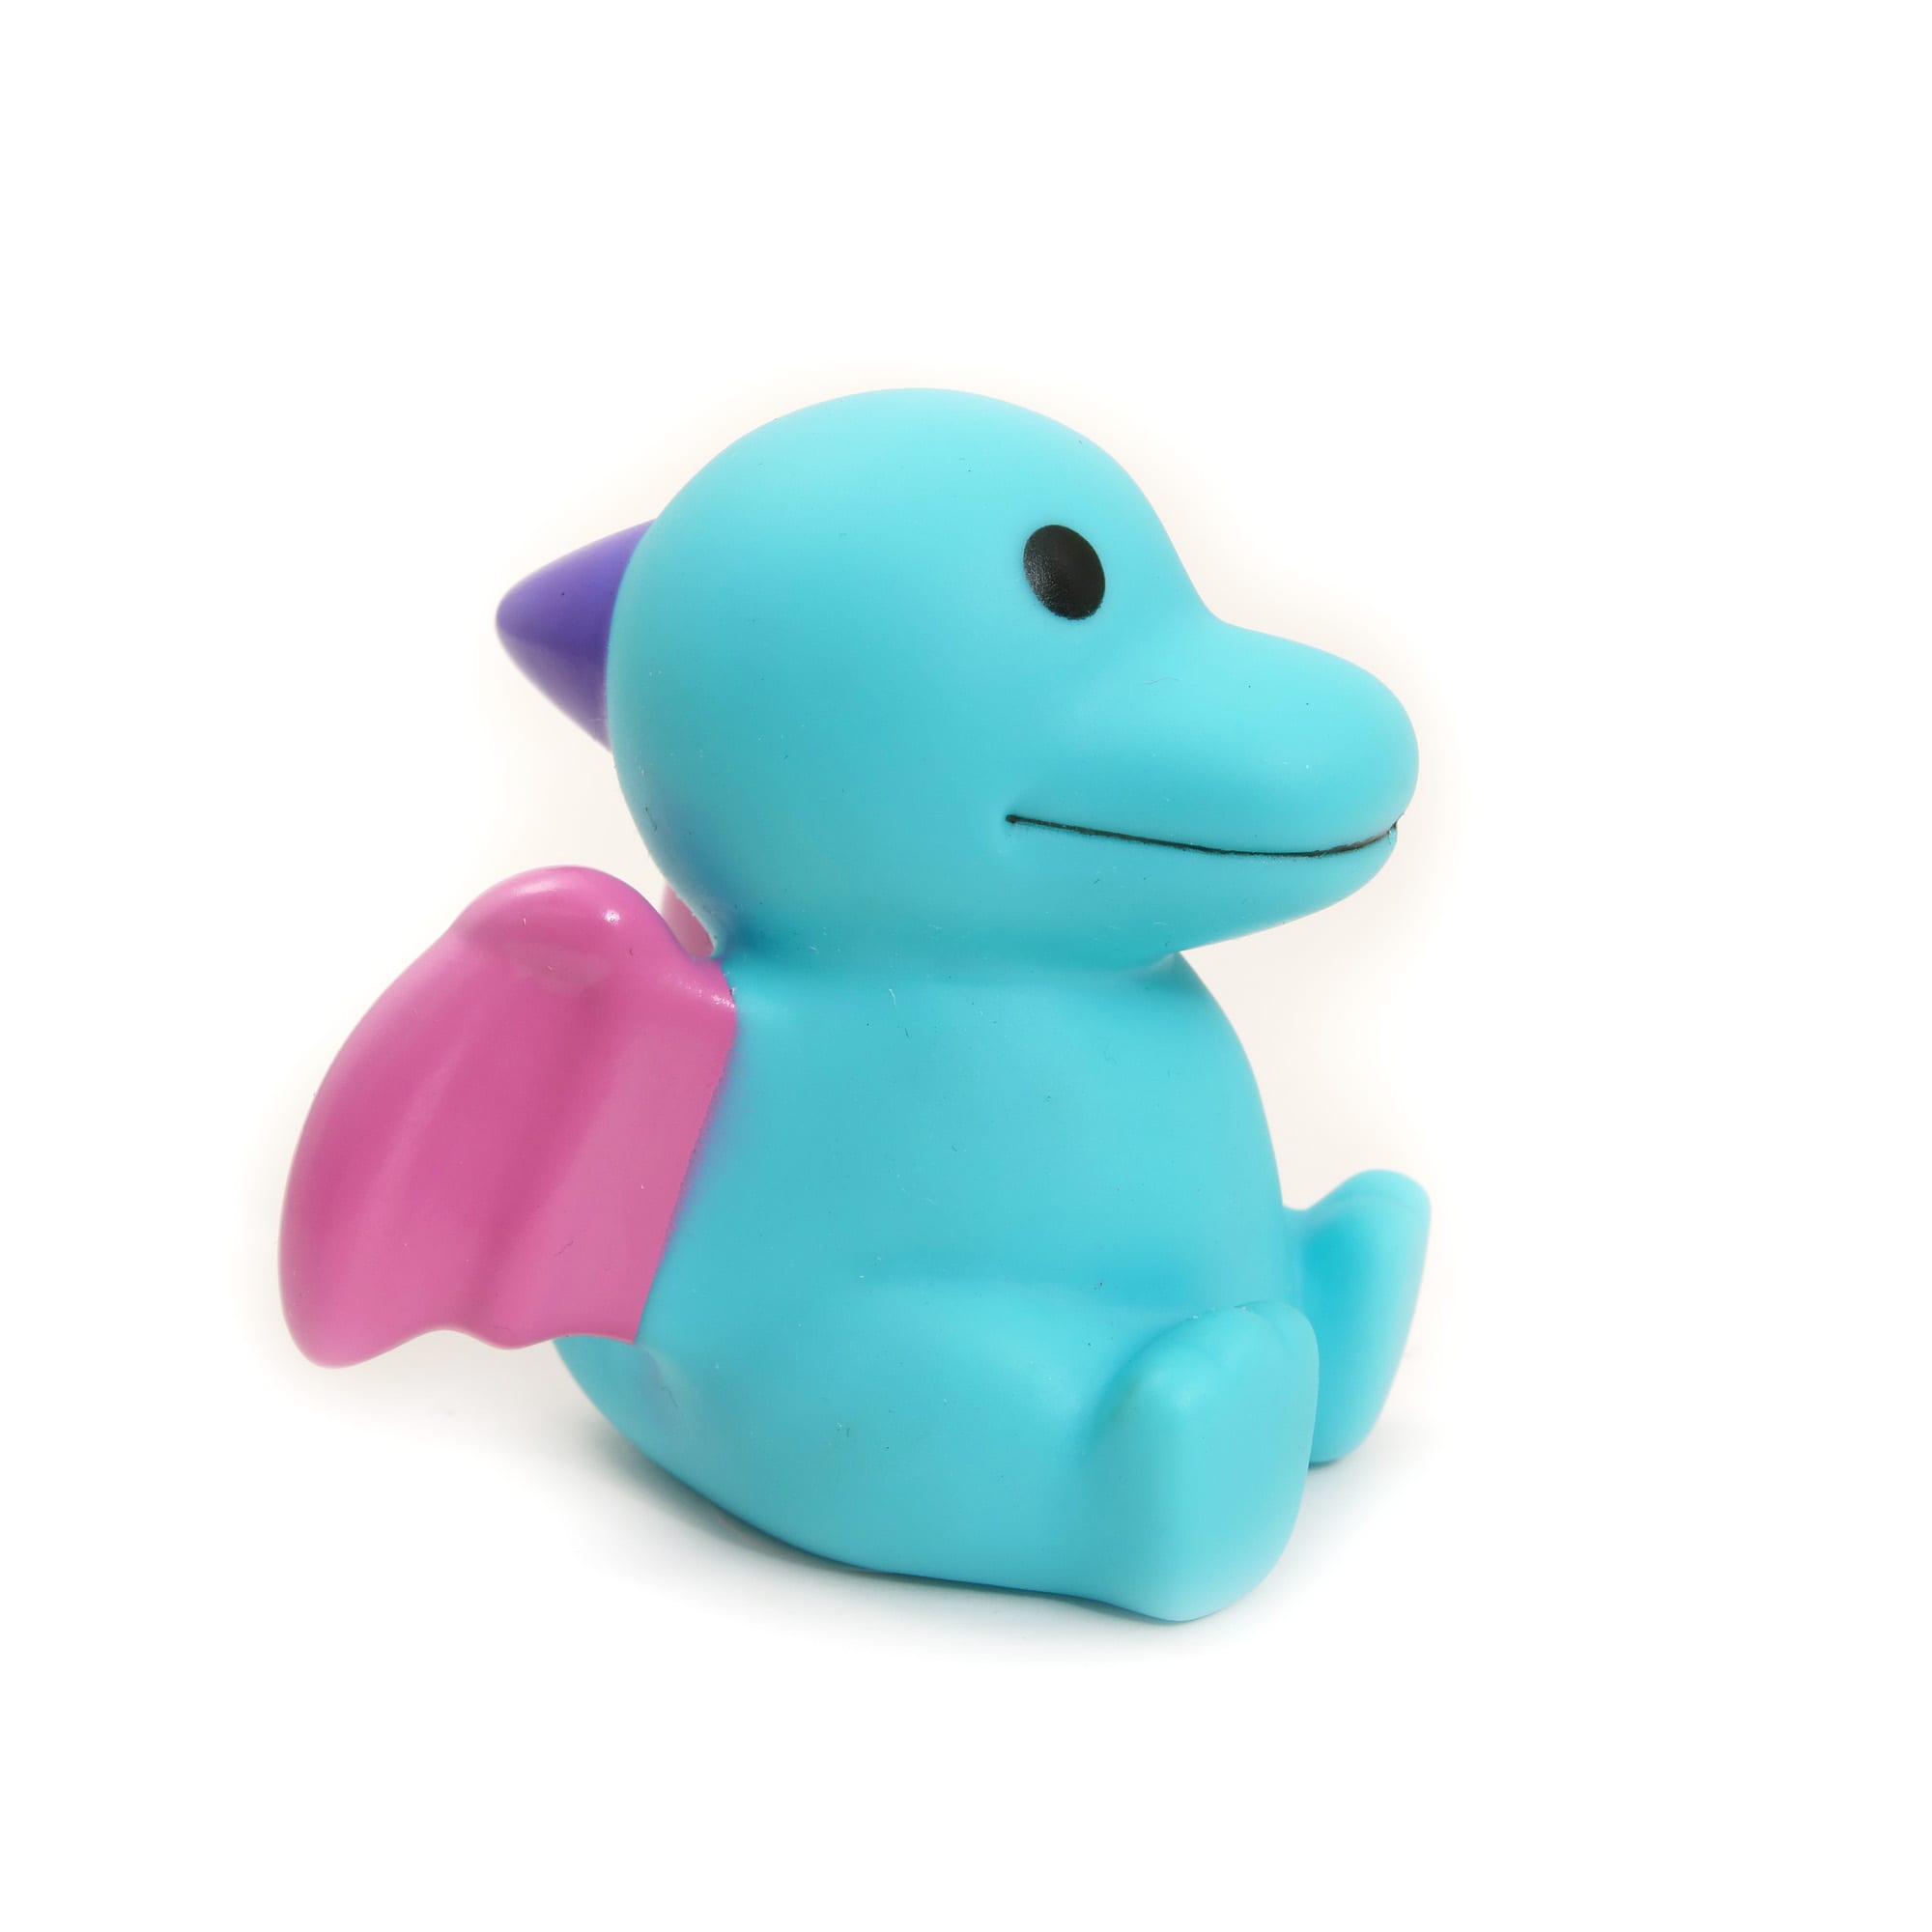 https://www.houseofmarbles.us/wp-content/uploads/2019/05/213291-Squirty-Saurus-Bath-Toy-Blue-2.jpg